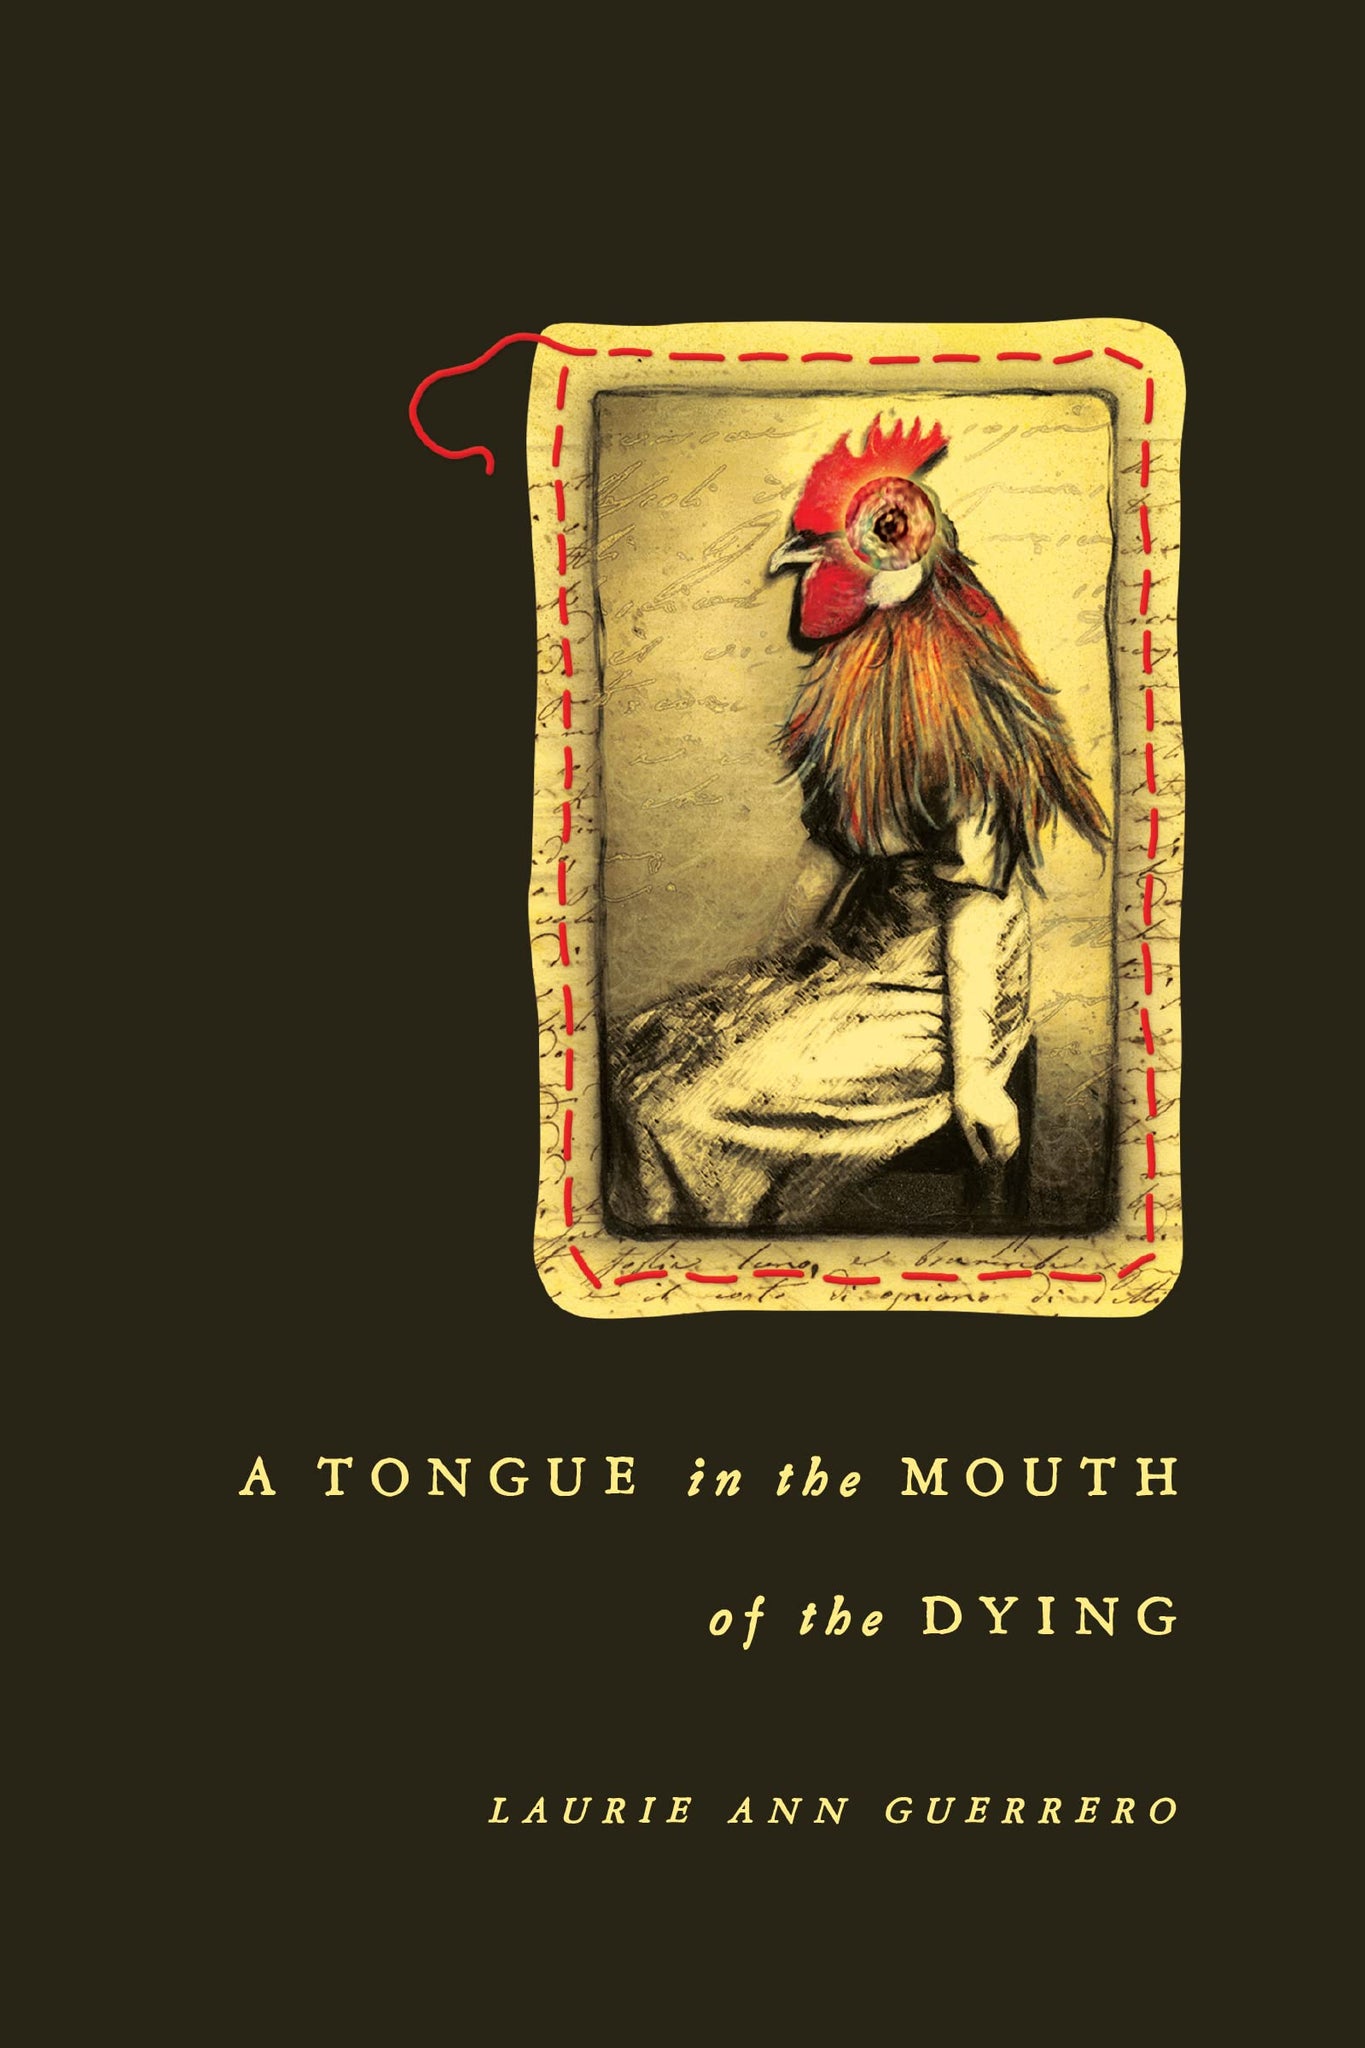 A Tongue in the Mouth of the Dying